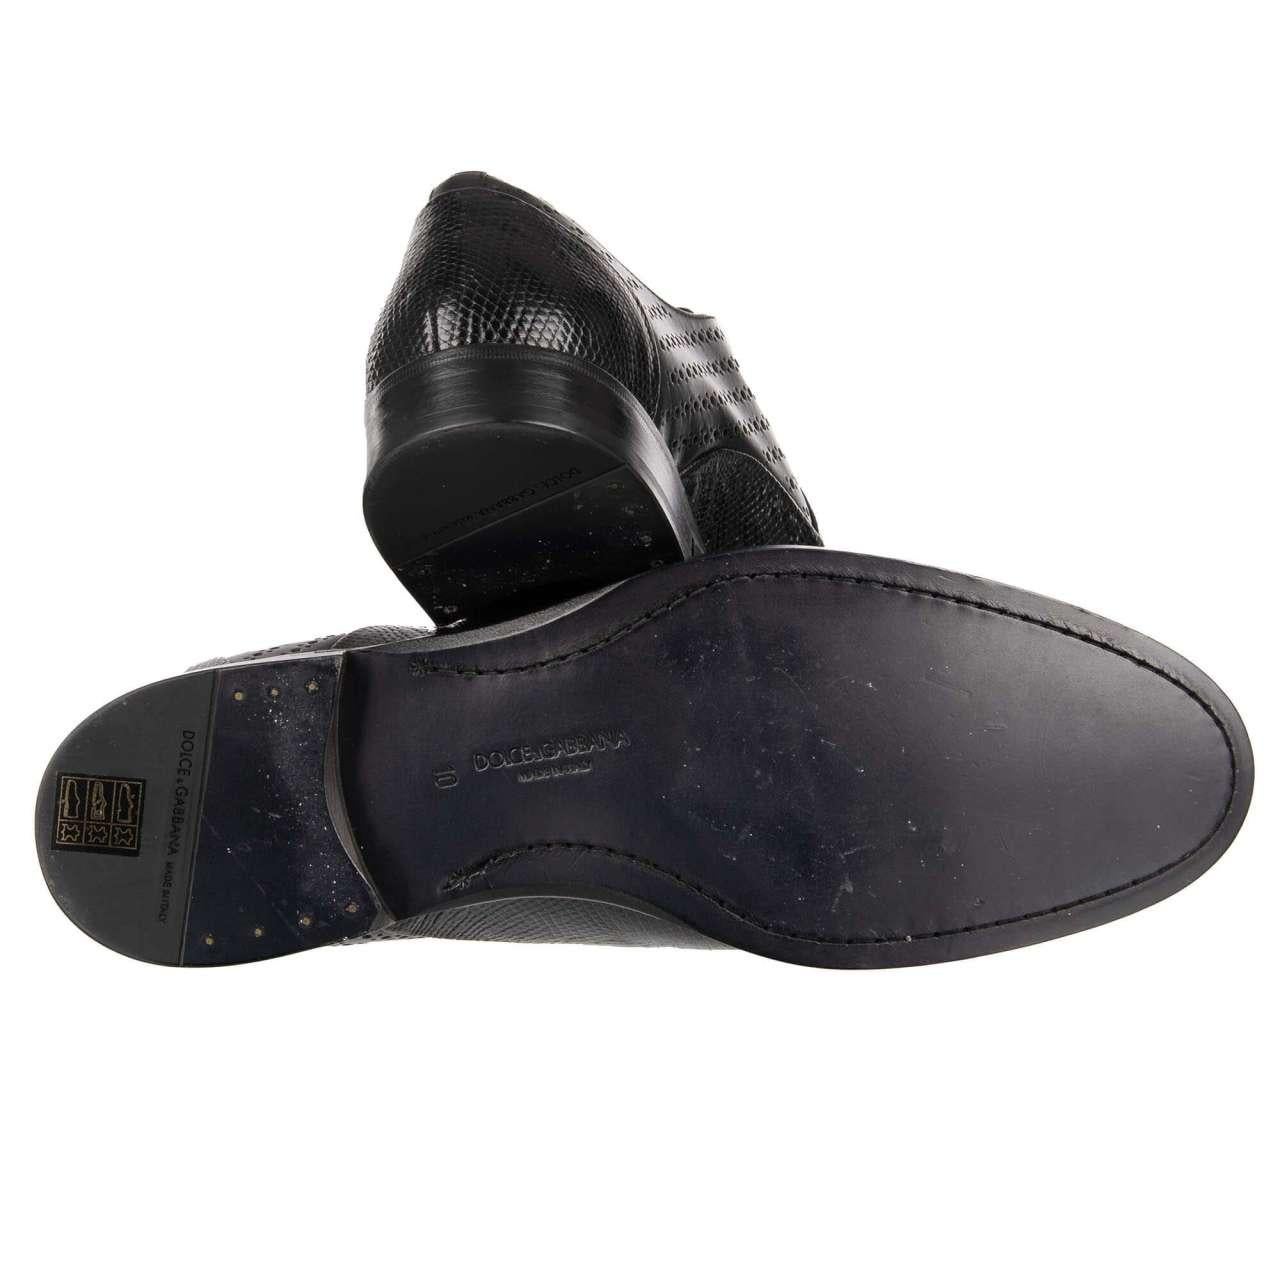 - Exclusive formal patchwork derby shoes NAPOLI made of lizard and leather in black by DOLCE & GABBANA - MADE IN ITALY - Former RRP: EUR 1.450 - New with light traces on the sole, with Box - Model: A10053-A2D81-80999 - Material: 70% Lizard Leather,